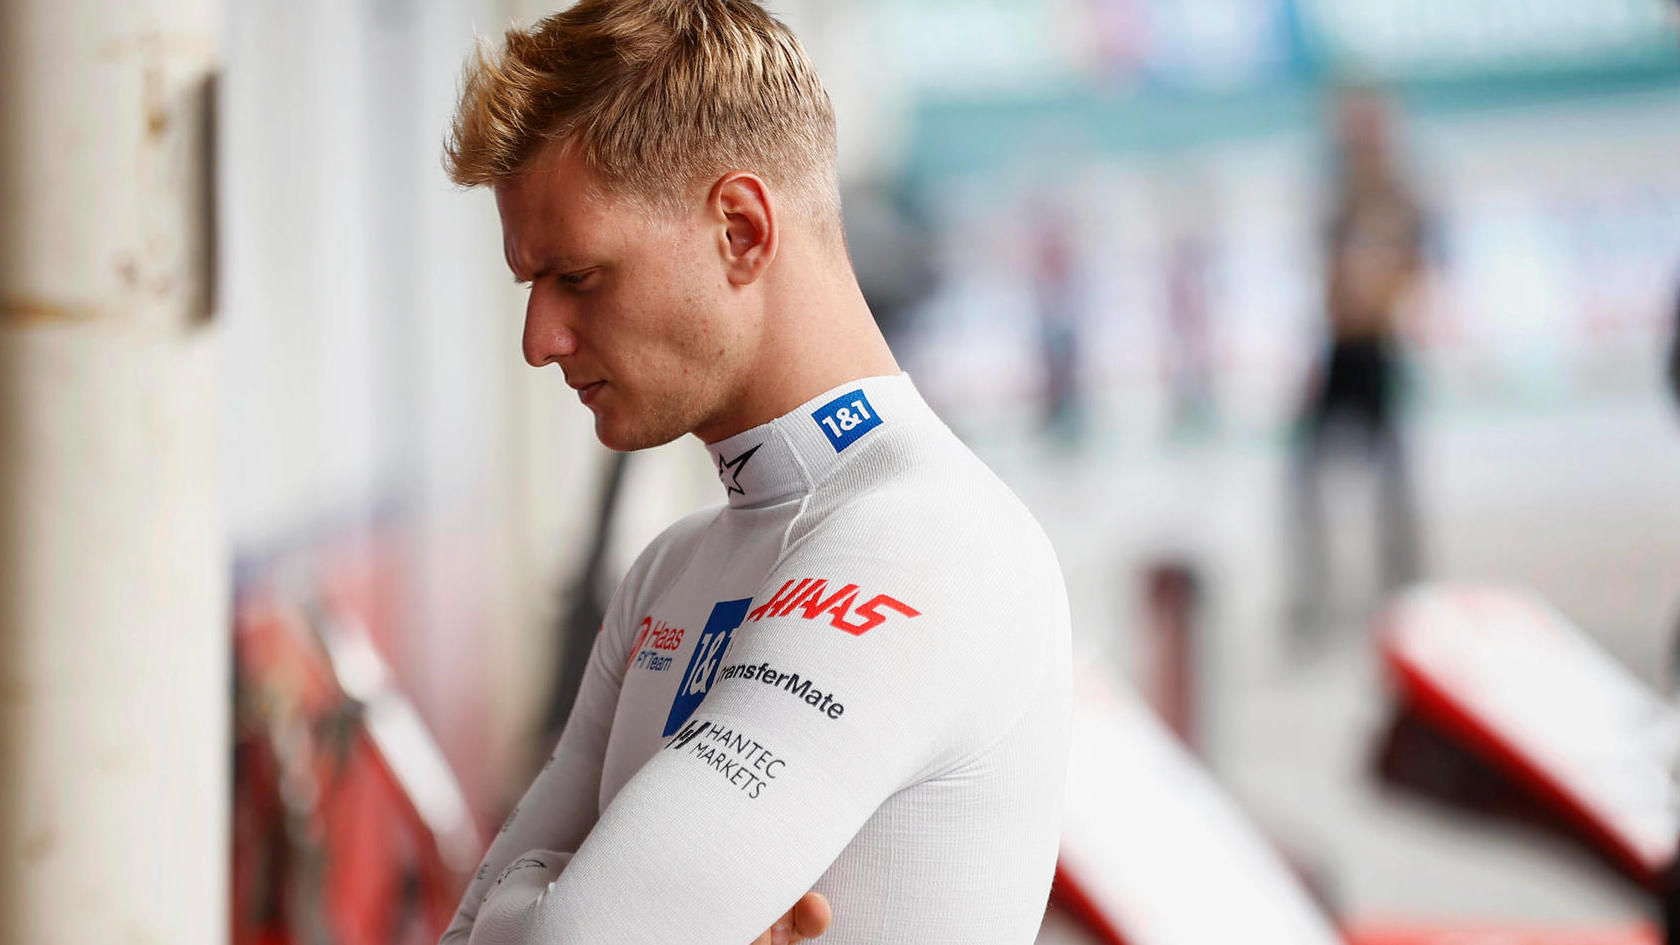 From Mick Schumacher at Haas - Hülkenberg comes to Formula 1